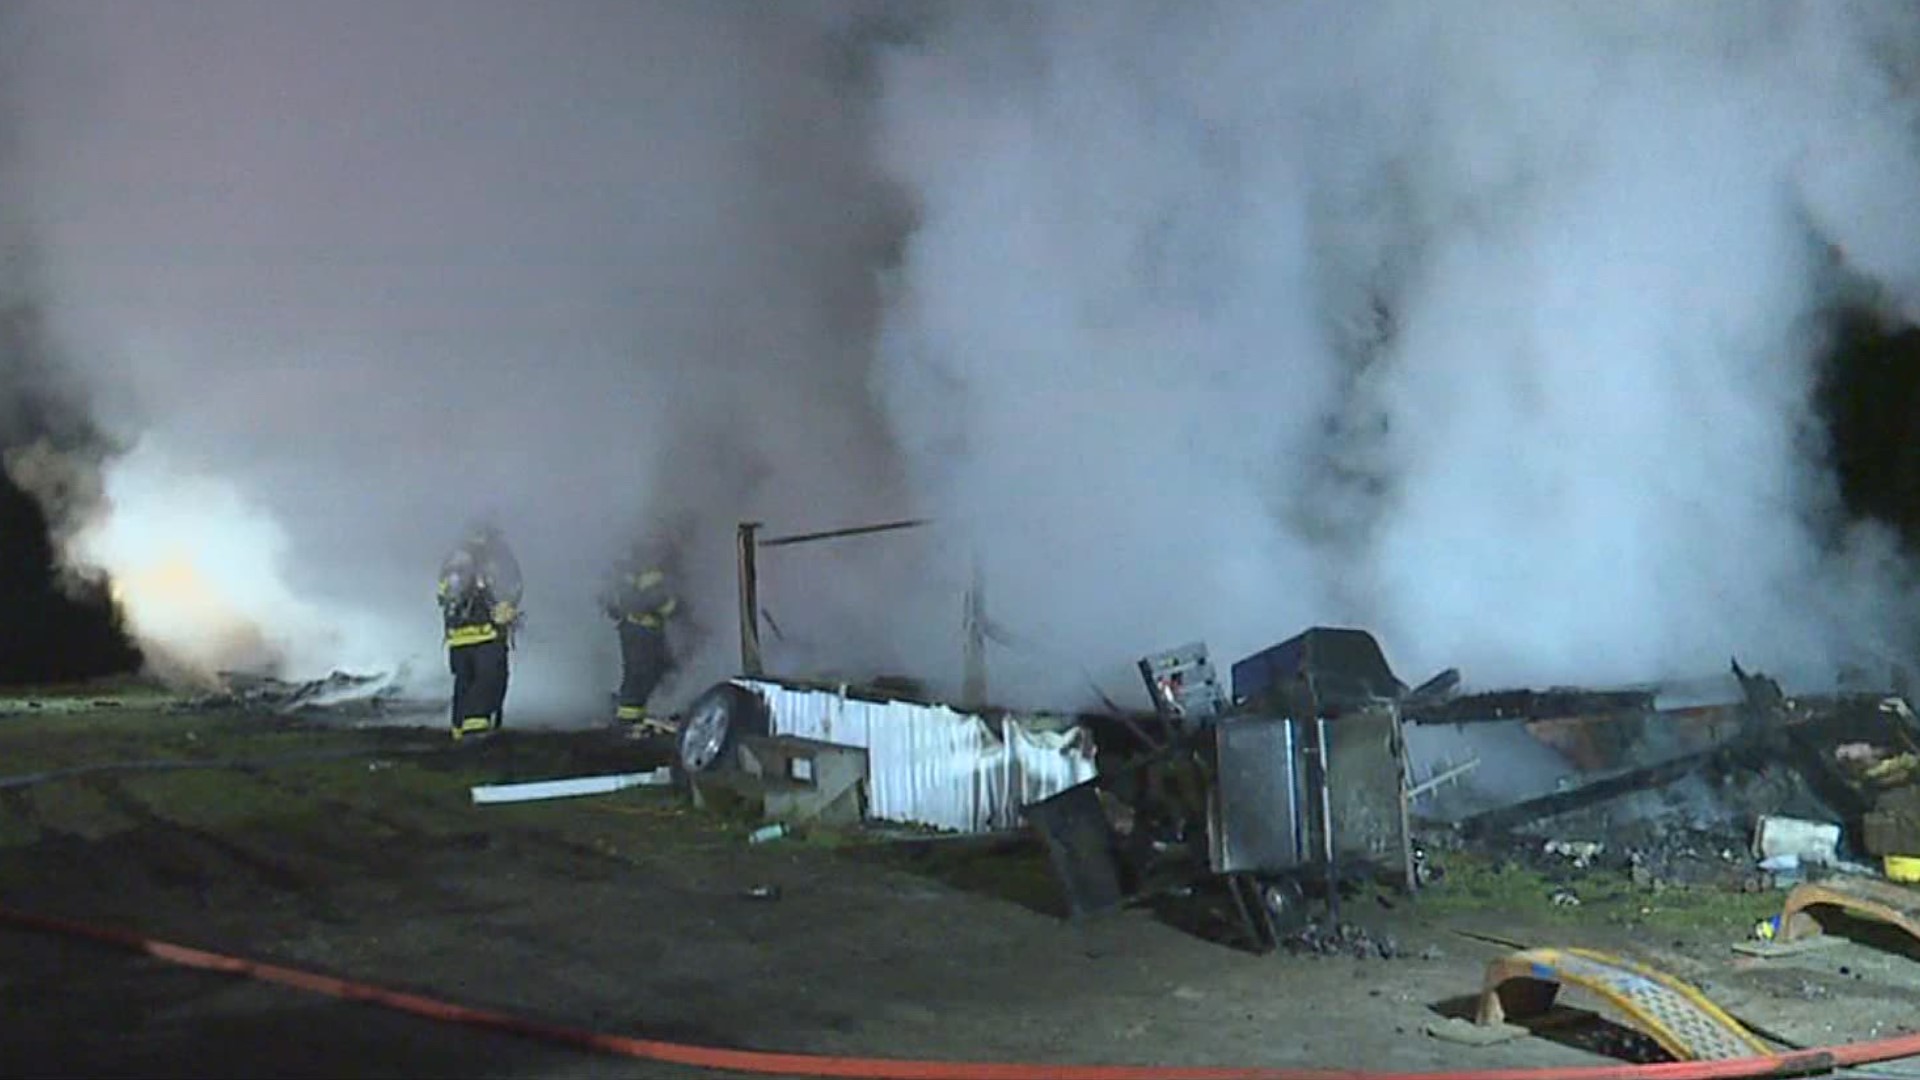 Flames gutted a mobile home early Tuesday morning in Susquehanna County.